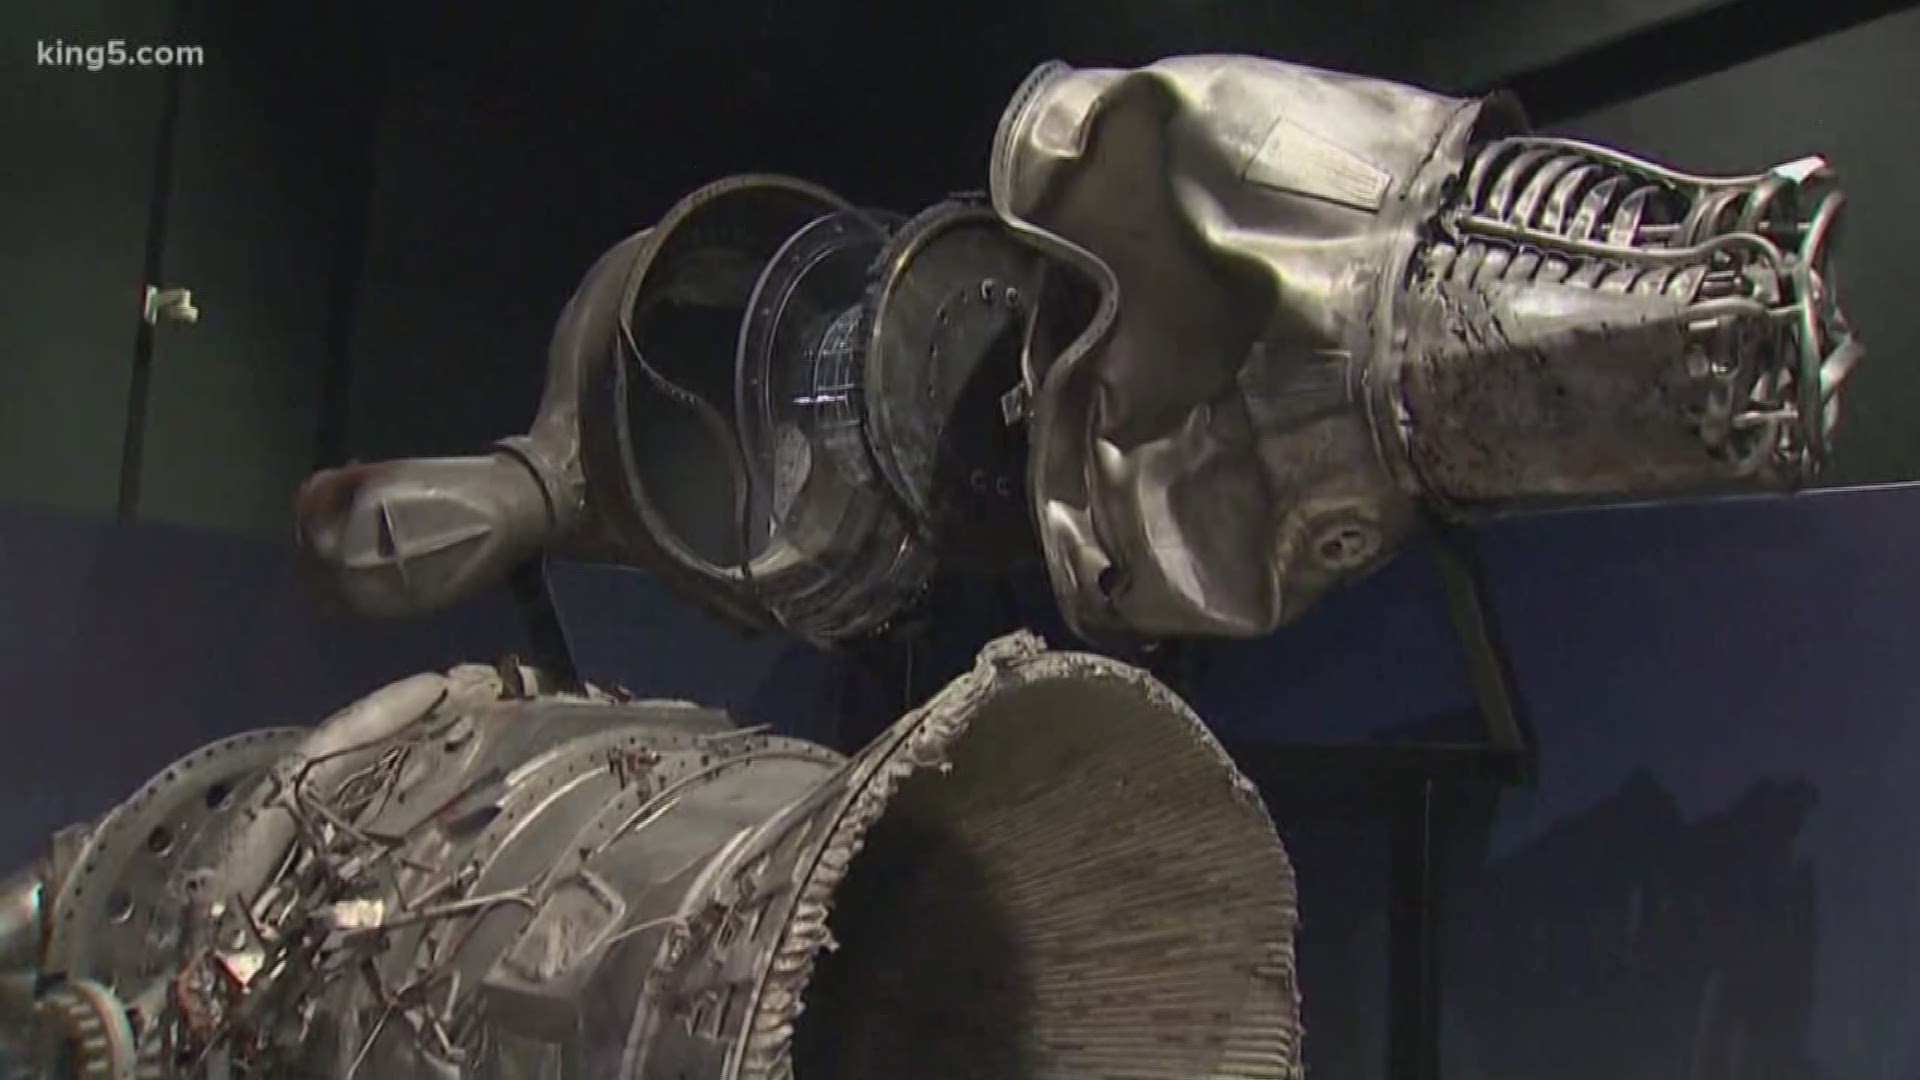 We're getting an exclusive first look inside "Destination Moon," a brand new exhibit at Seattle's Museum of Flight.